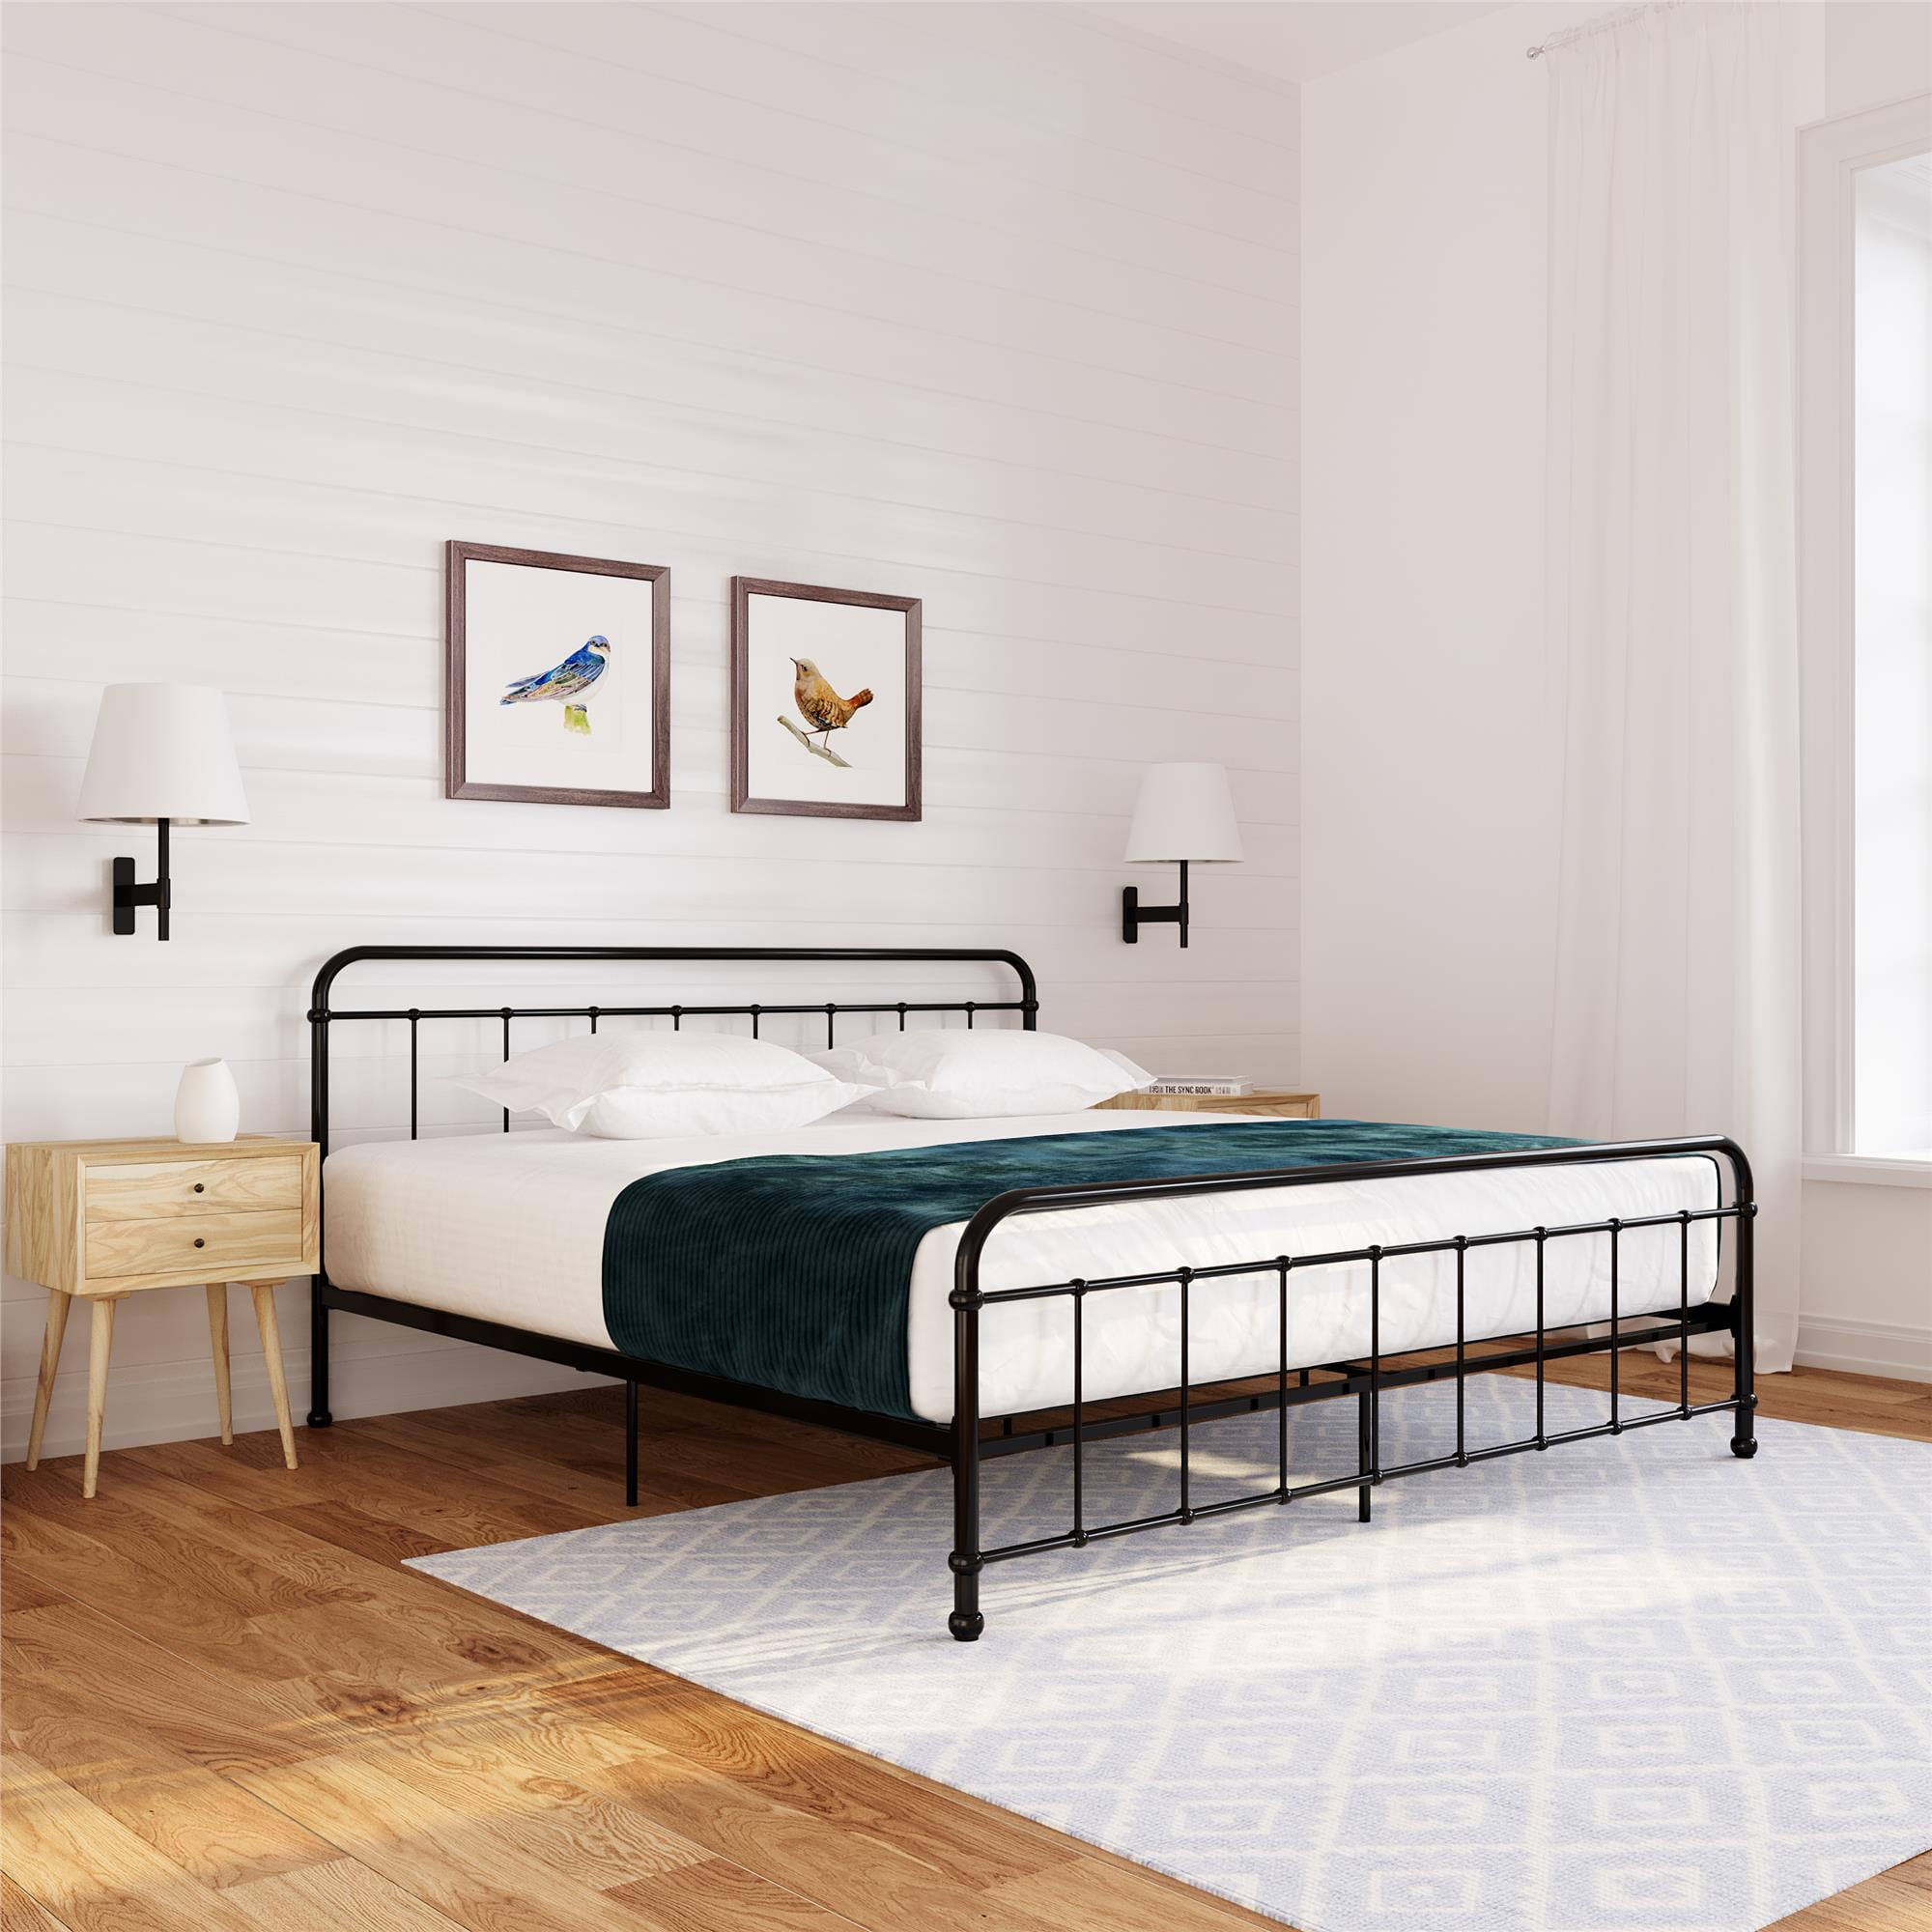 Woven Paths Contemporary Iron King Bed, Black Wrought Iron Headboard